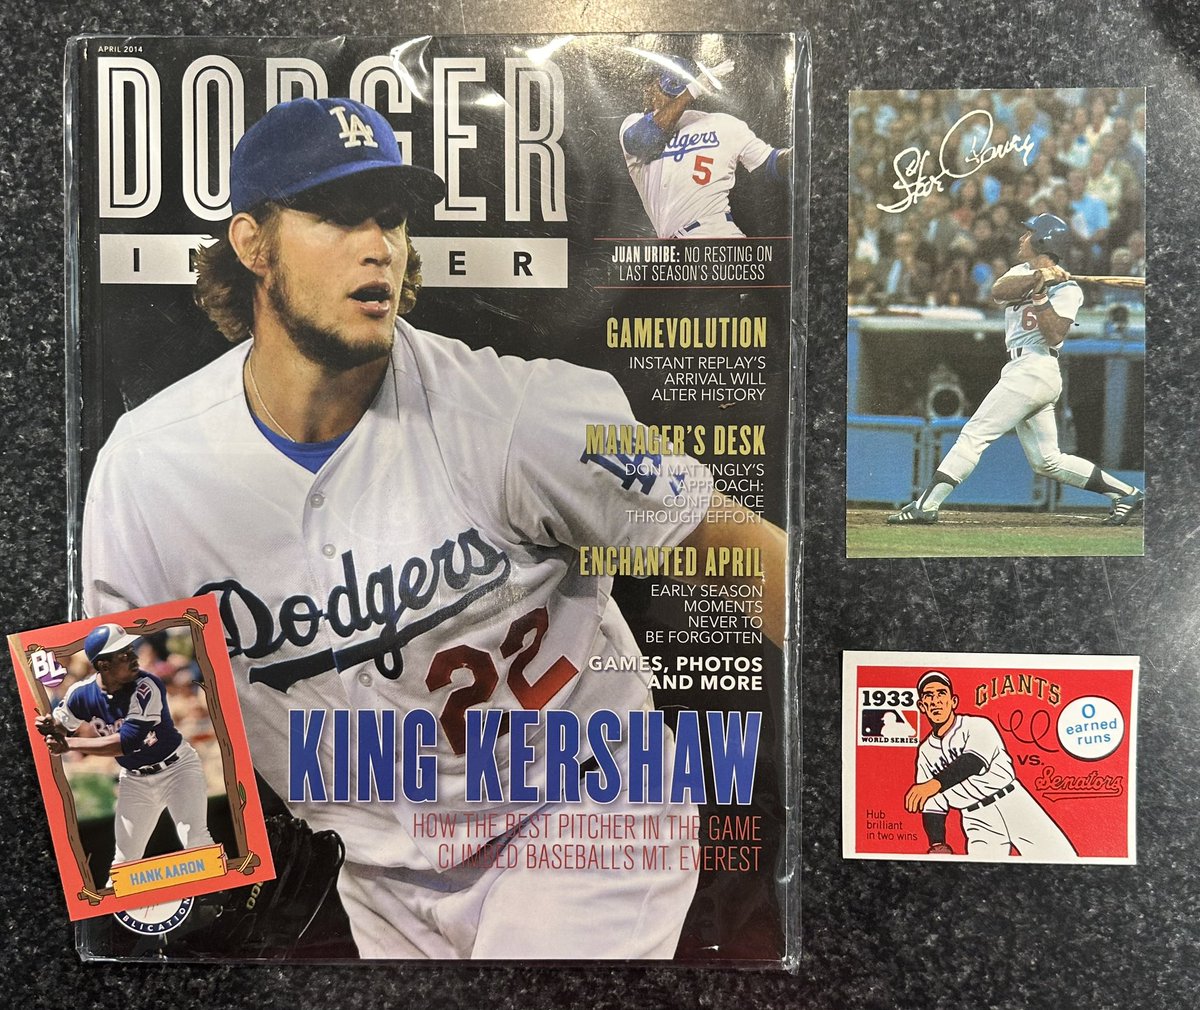 #MailDay from the one and only @dodgers_cards! Thanks so much, Chad! All are amazing.